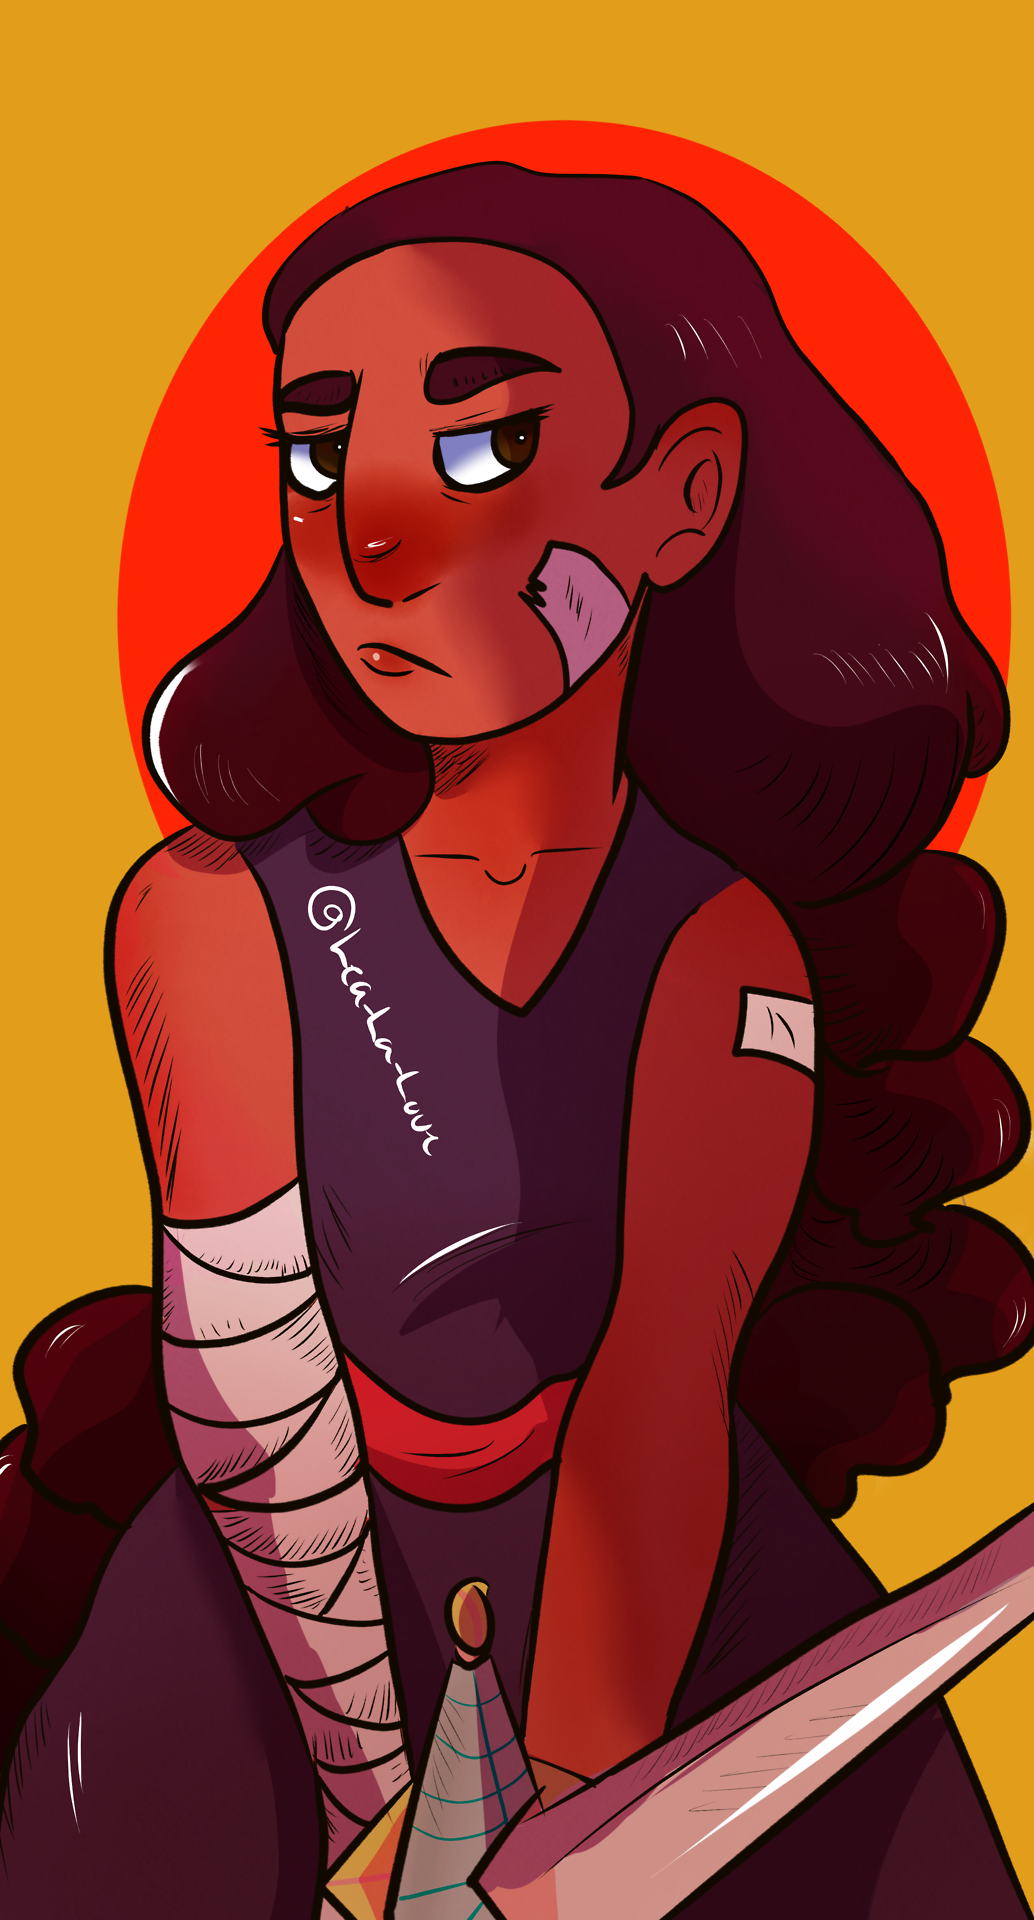 CONNIE!!! This was me practicing a new style and I love how it came out!